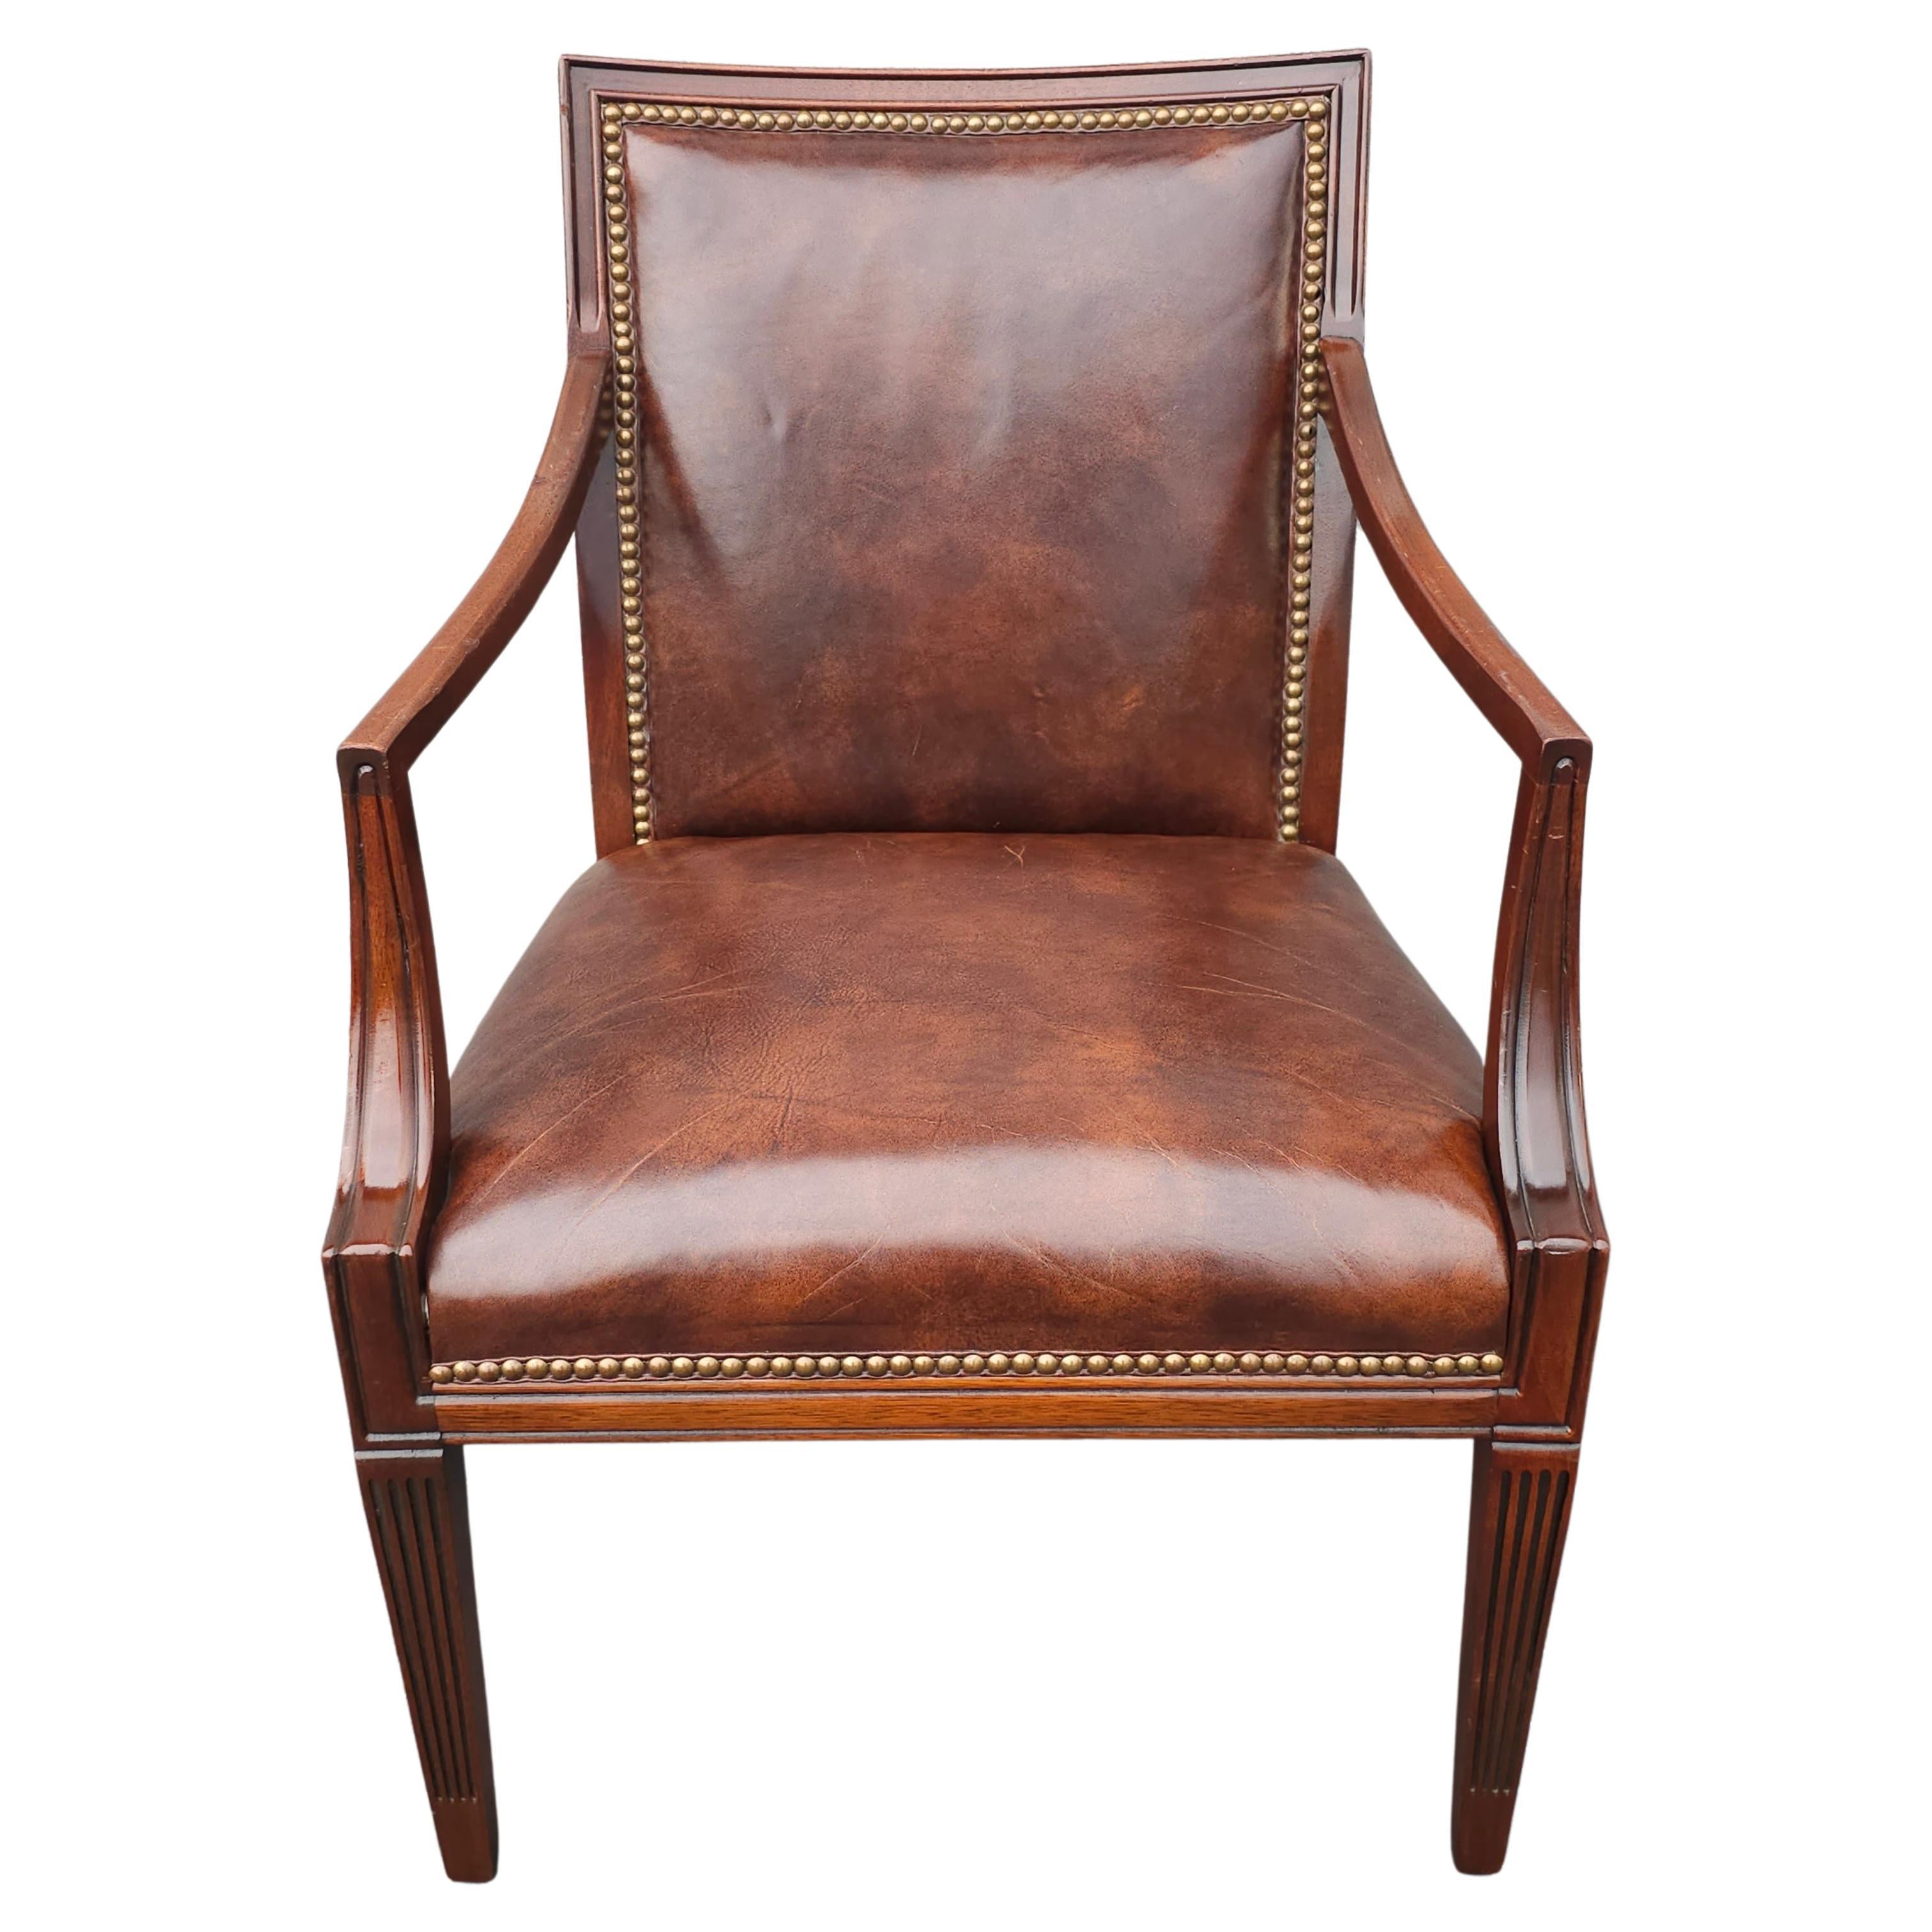 20th Century Stateville Chair Co. Mahogany and Leather Upholstered Armchair  For Sale